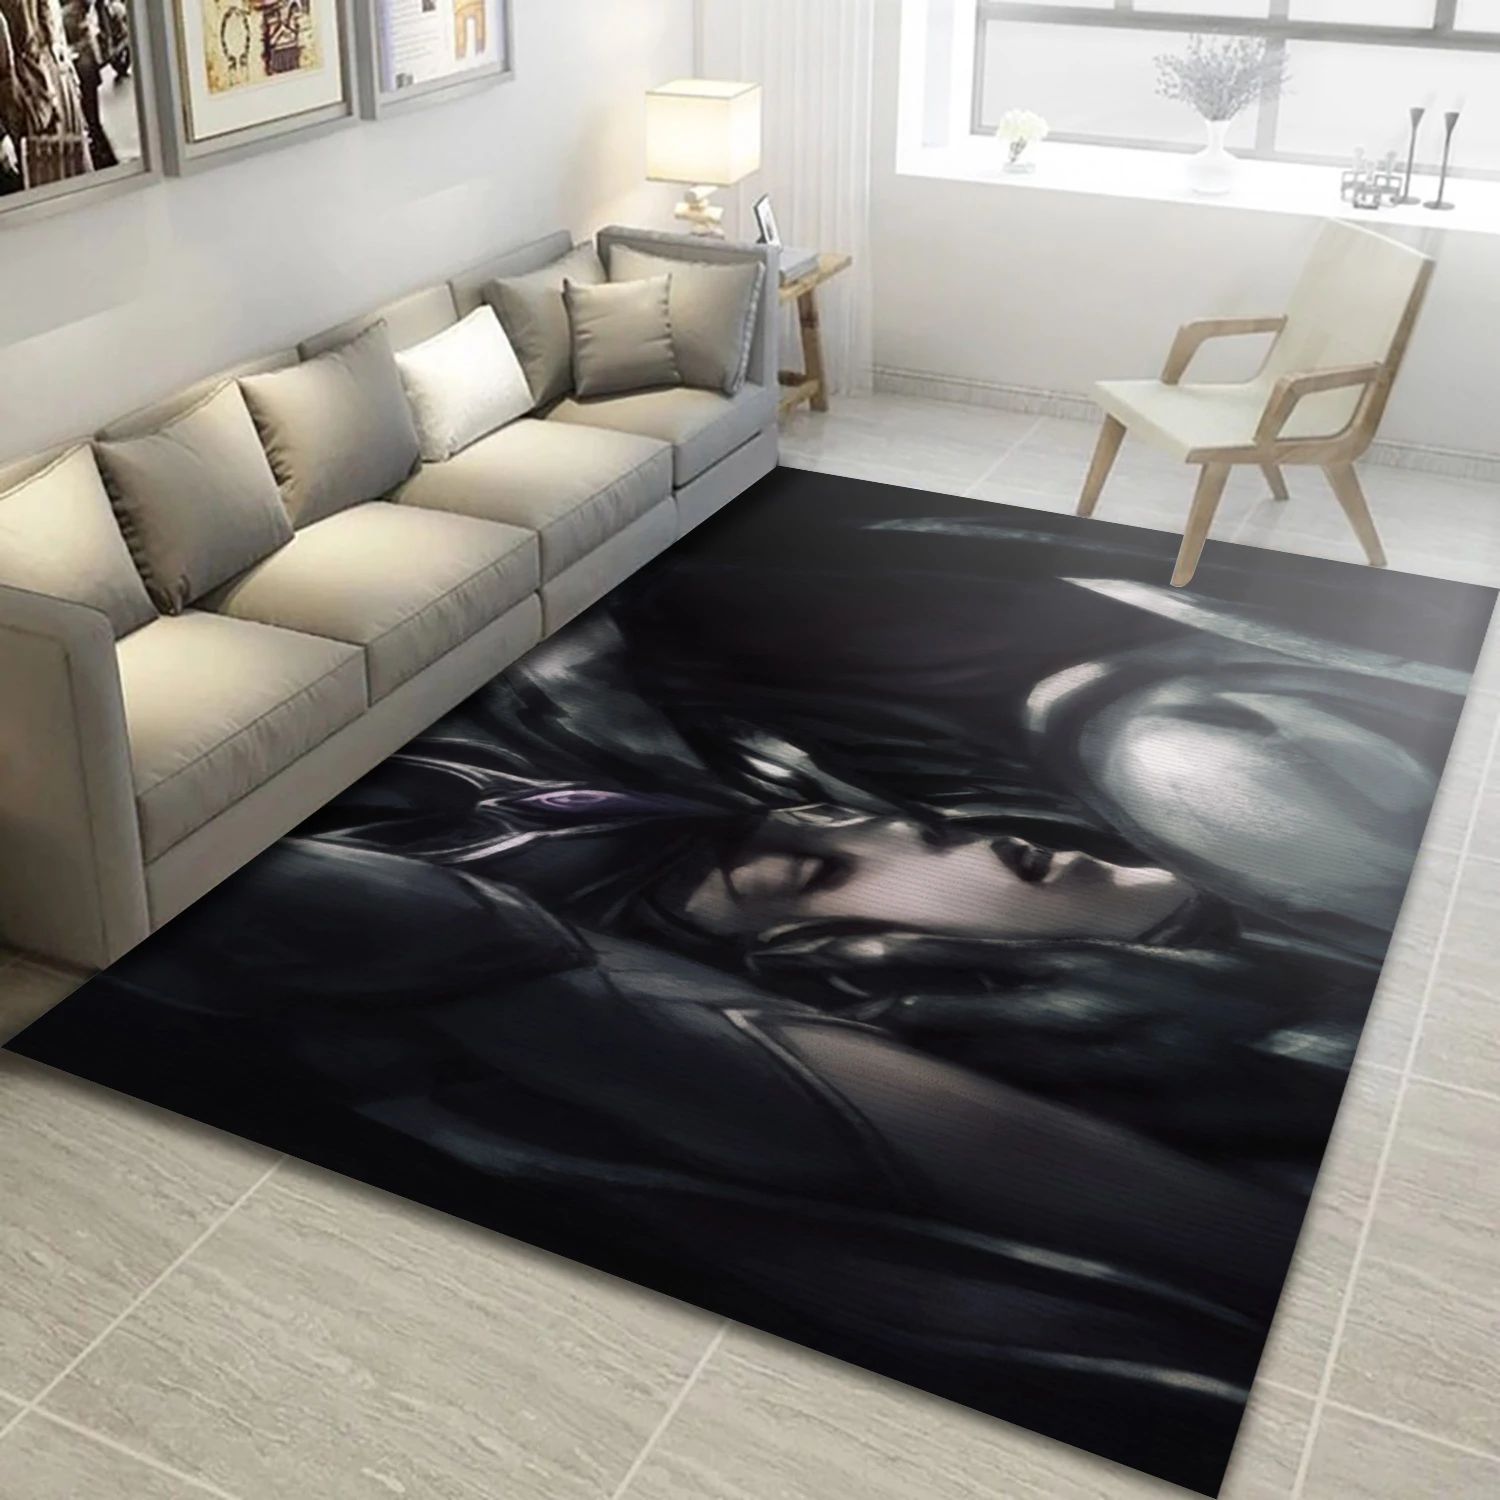 League Of Legends Video Game Area Rug For Christmas, Bedroom Rug - Home Decor Floor Decor - Indoor Outdoor Rugs 3